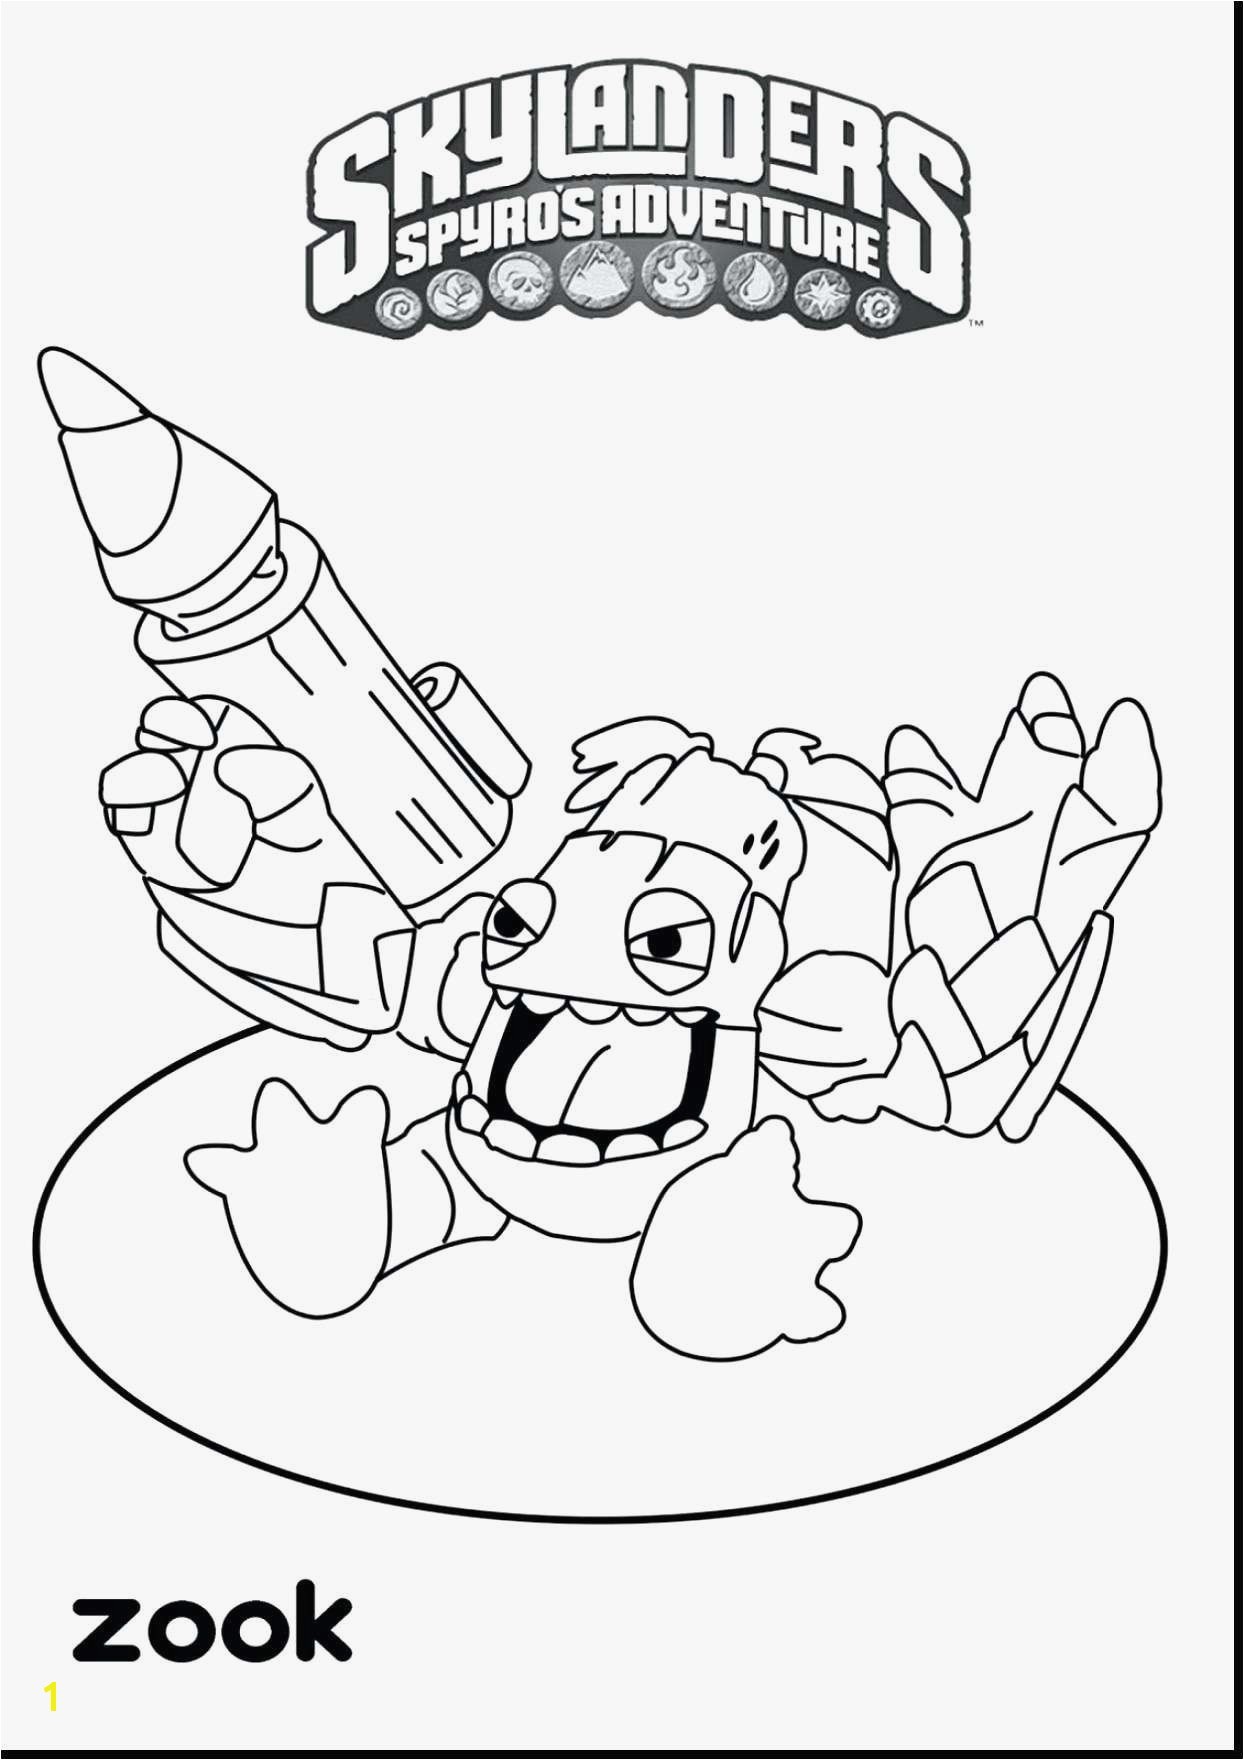 Cool Coloring Page Inspirational Witch Coloring Pages New Crayola Pages 0d Coloring Page